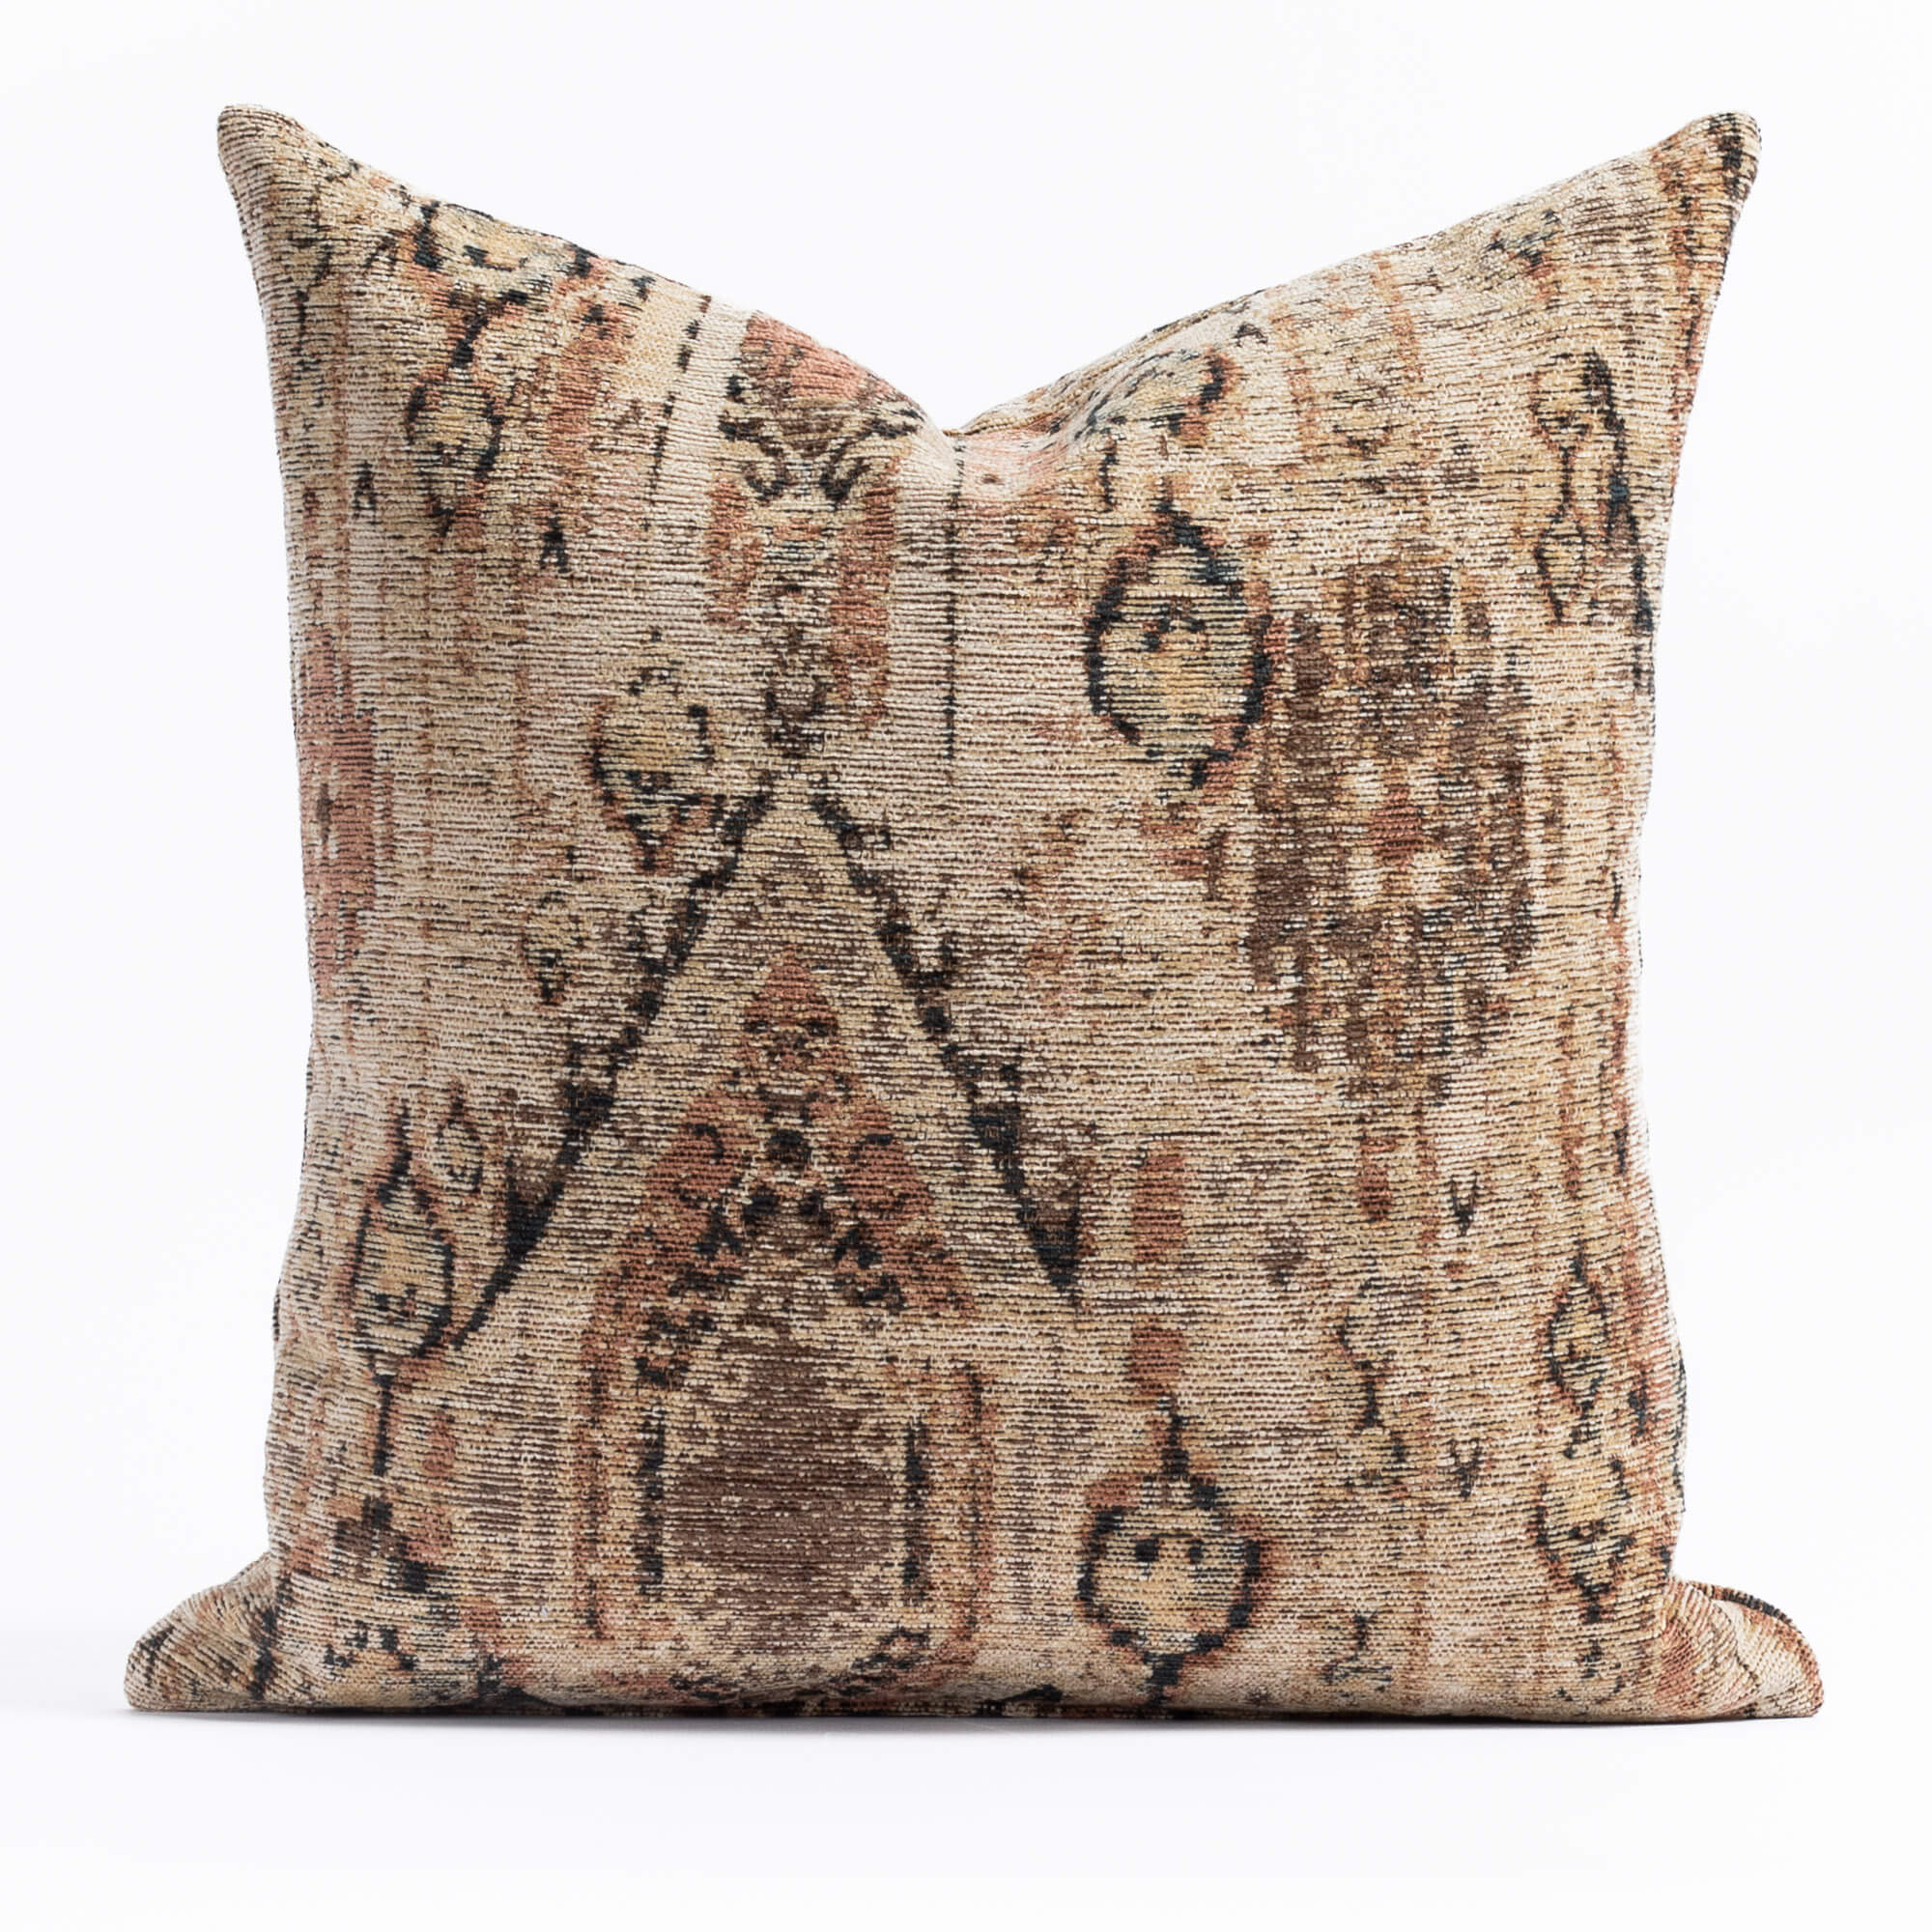 Souk 22x22 Pillow, a sand, brown and rust vintage chenille woven tapestry patterned throw pillow from Tonic Living